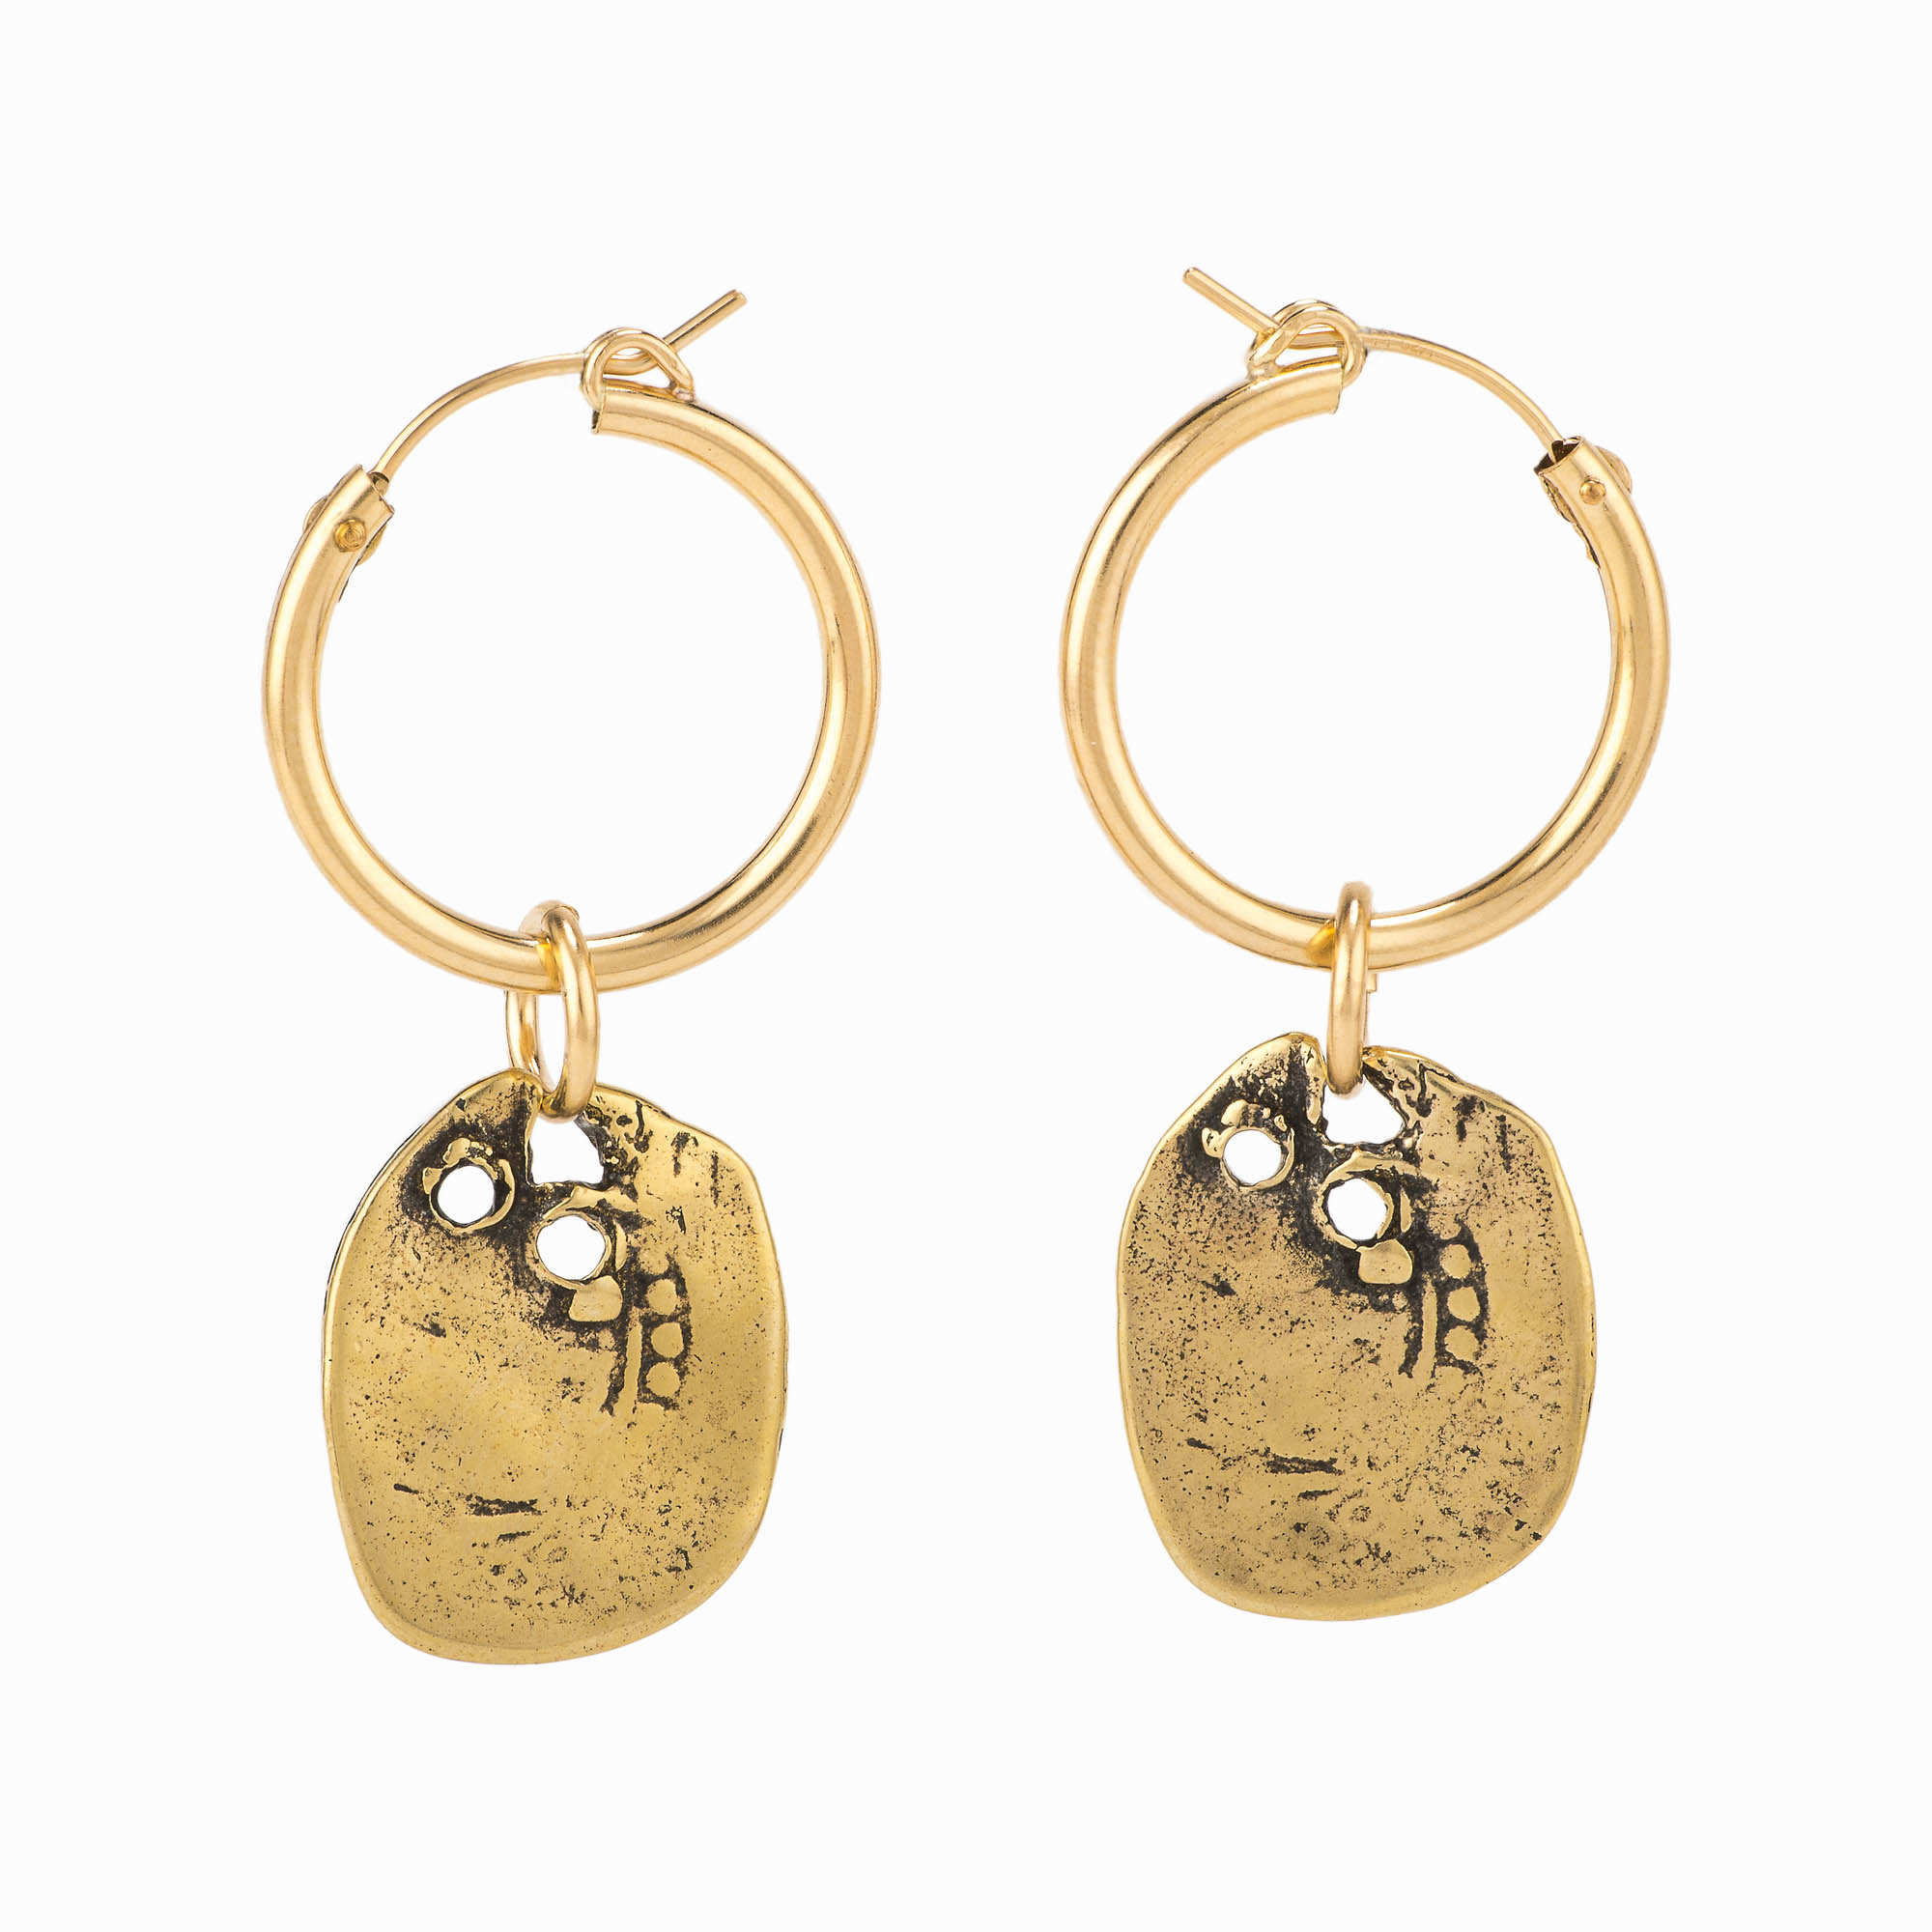 Featured image for “Clover Gold Hoop Earrings”